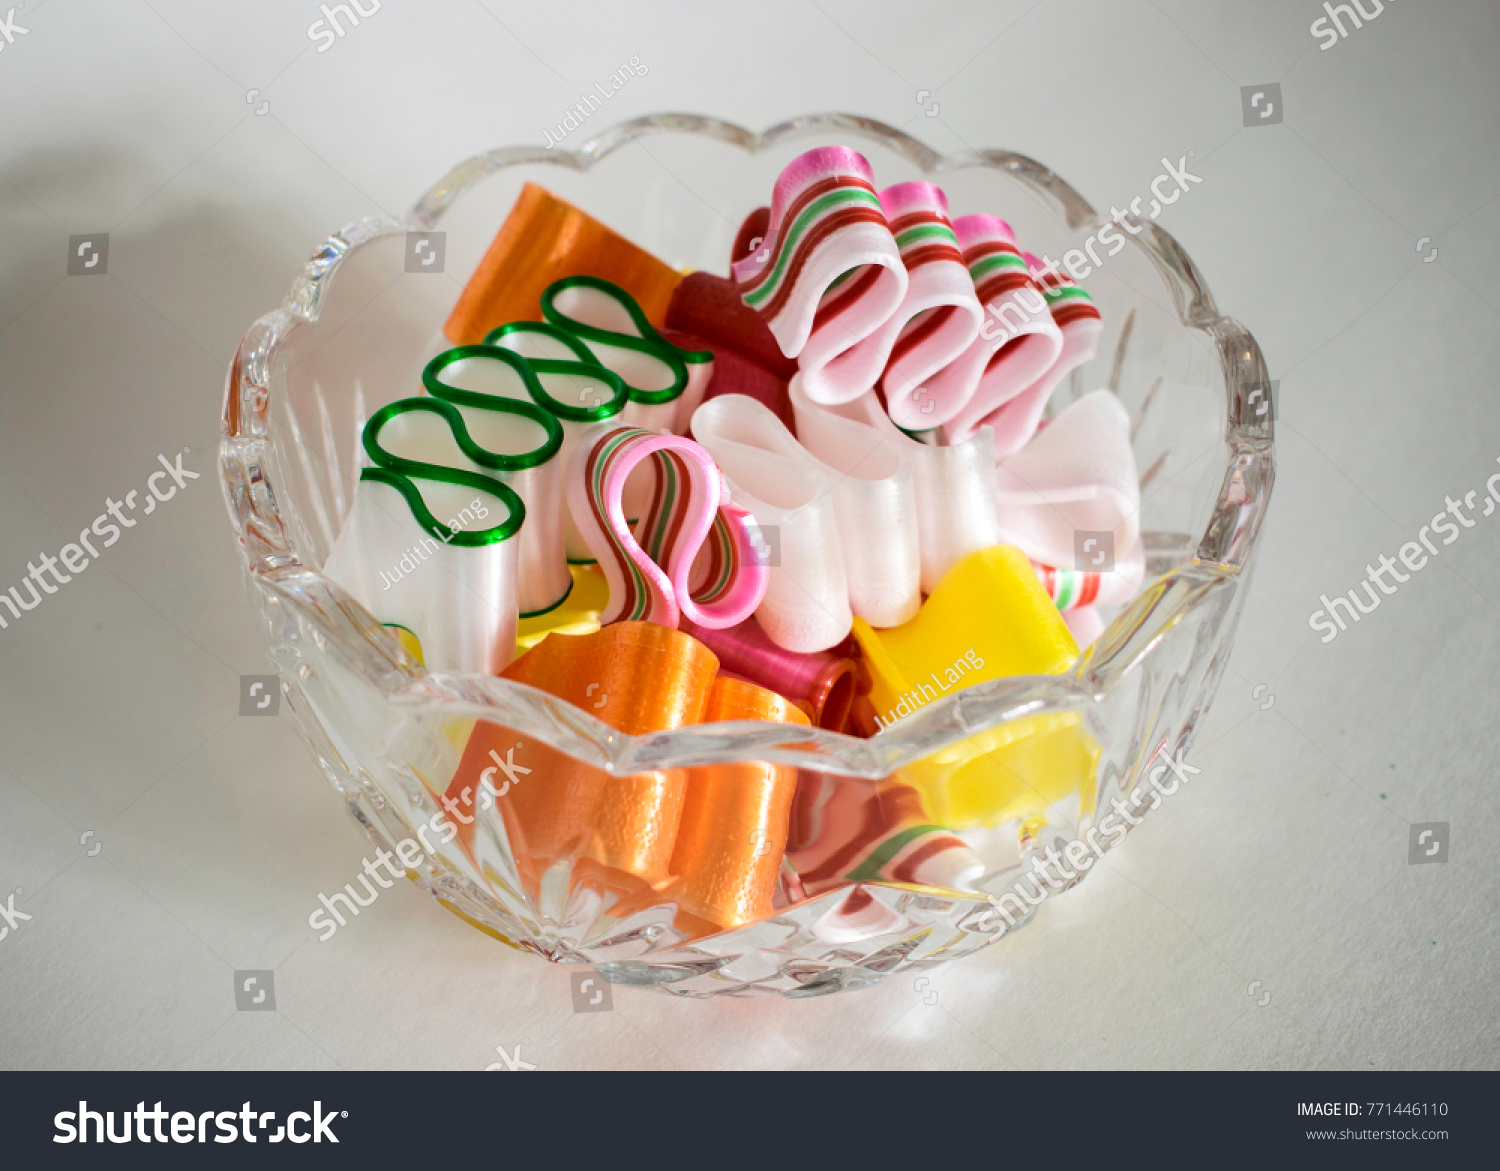 Beautiful crystal bowl is filled with colorful curving ribbon candy on white background. #771446110